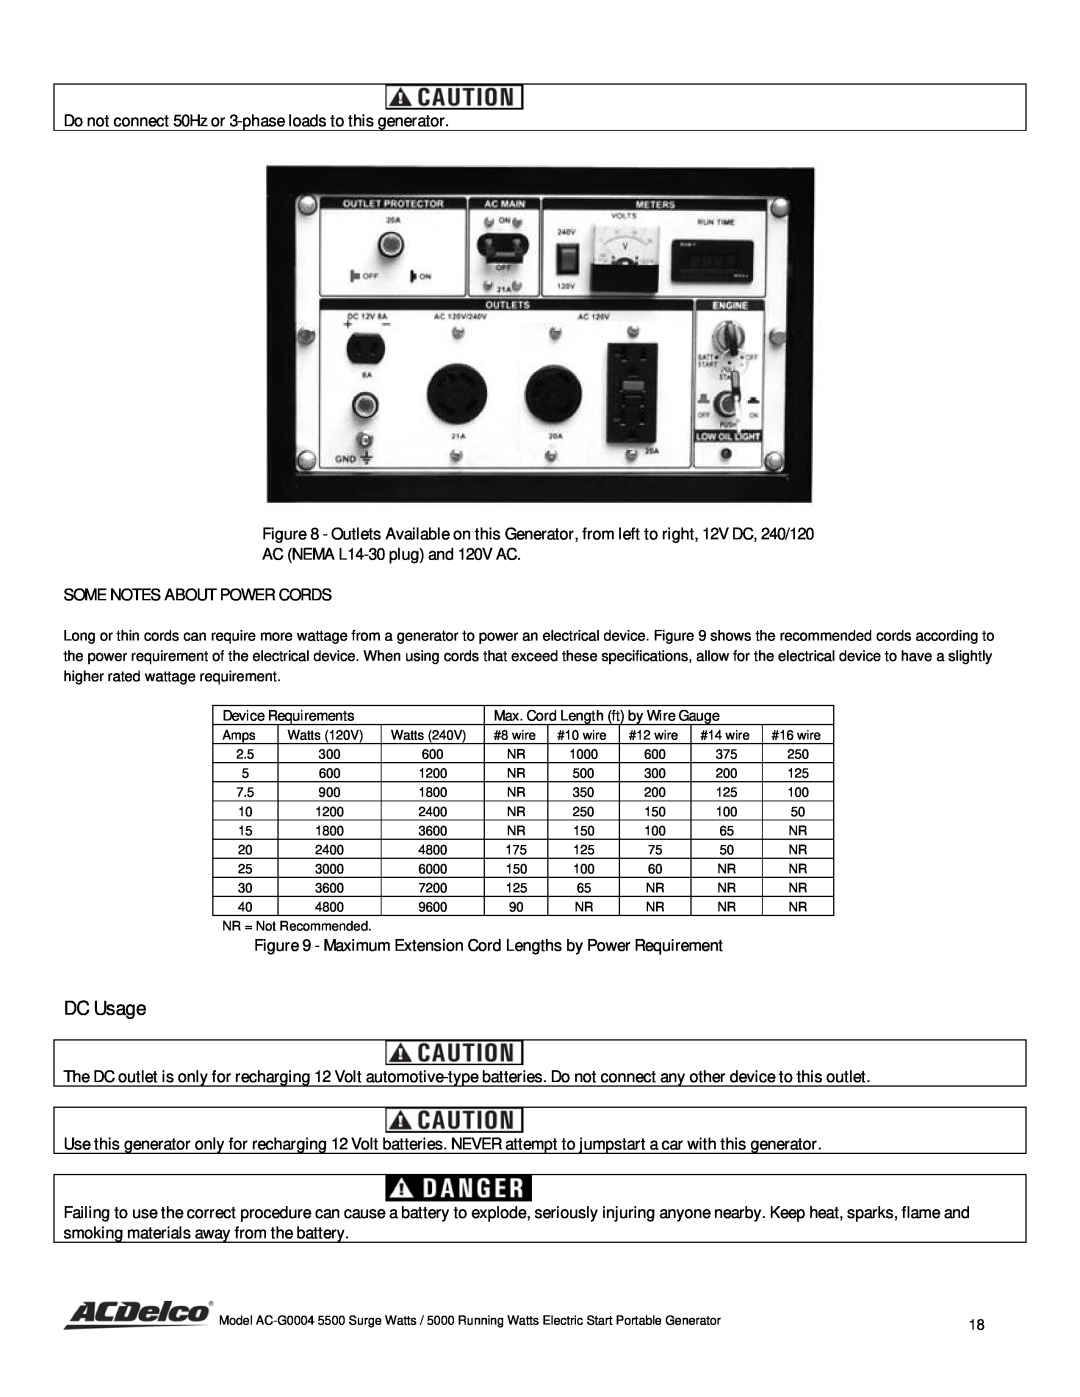 ACDelco AC-G0004 instruction manual DC Usage, Do not connect 50Hz or 3-phase loads to this generator 